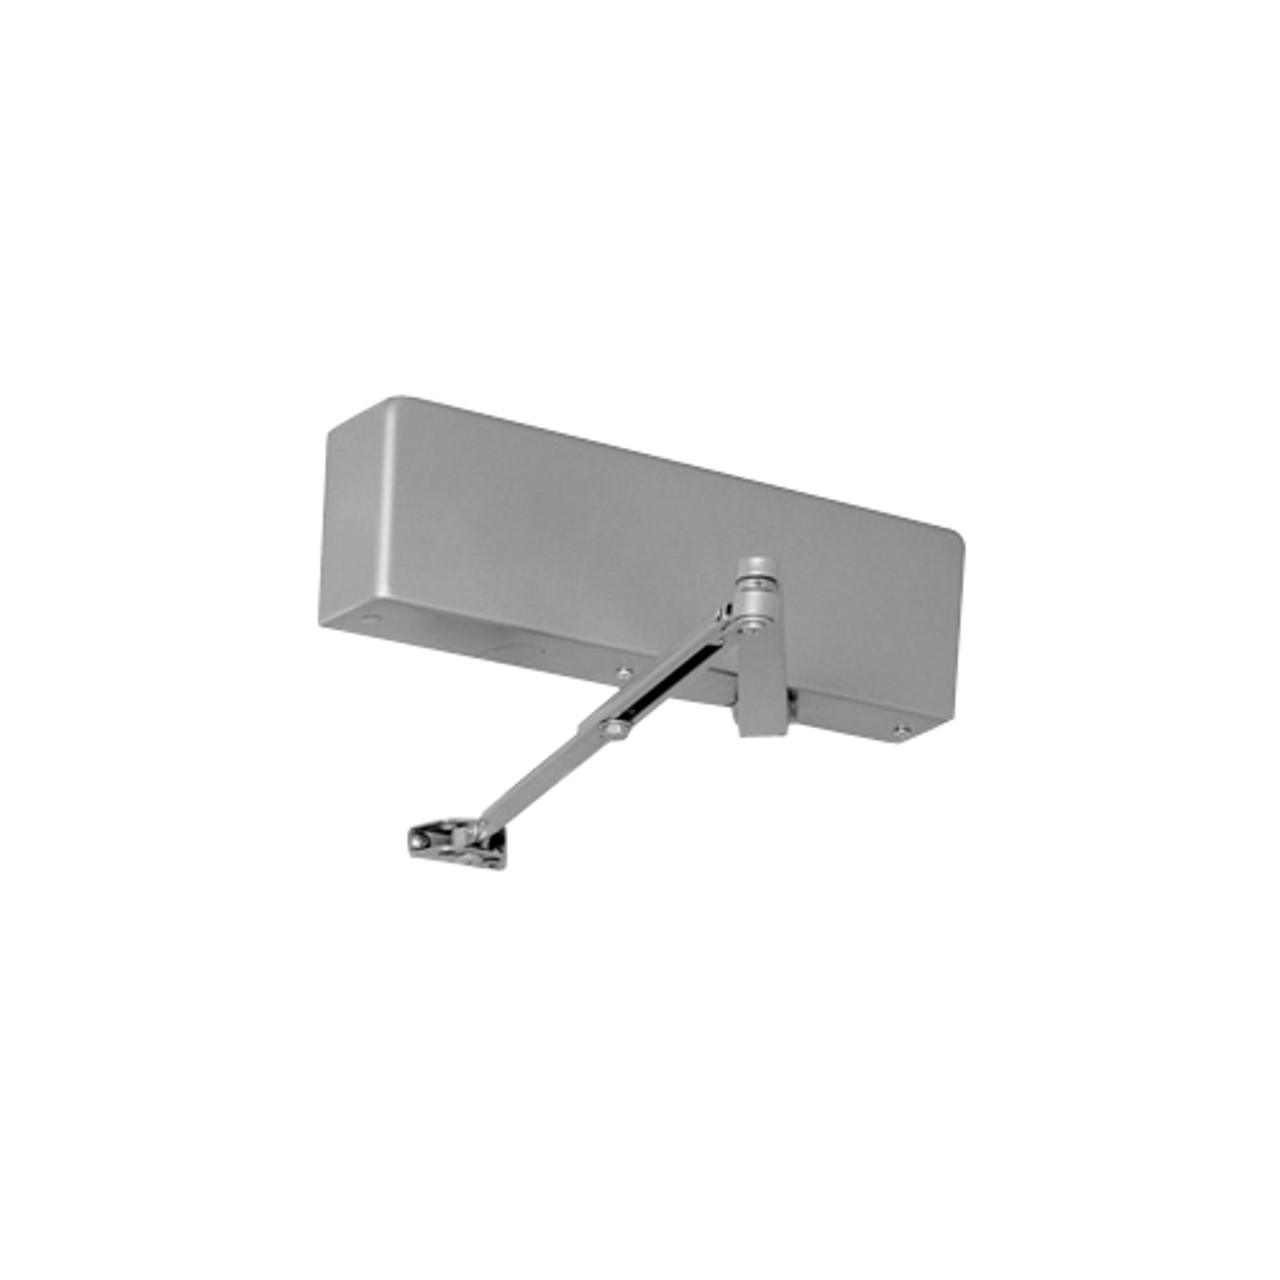 JL7500M-689 Norton 7500 Series Non-Hold Open Institutional Door Closer with Top Jamb Only Reveals 2-3/4 to 7 inch to 180 Degree in Aluminum Finish